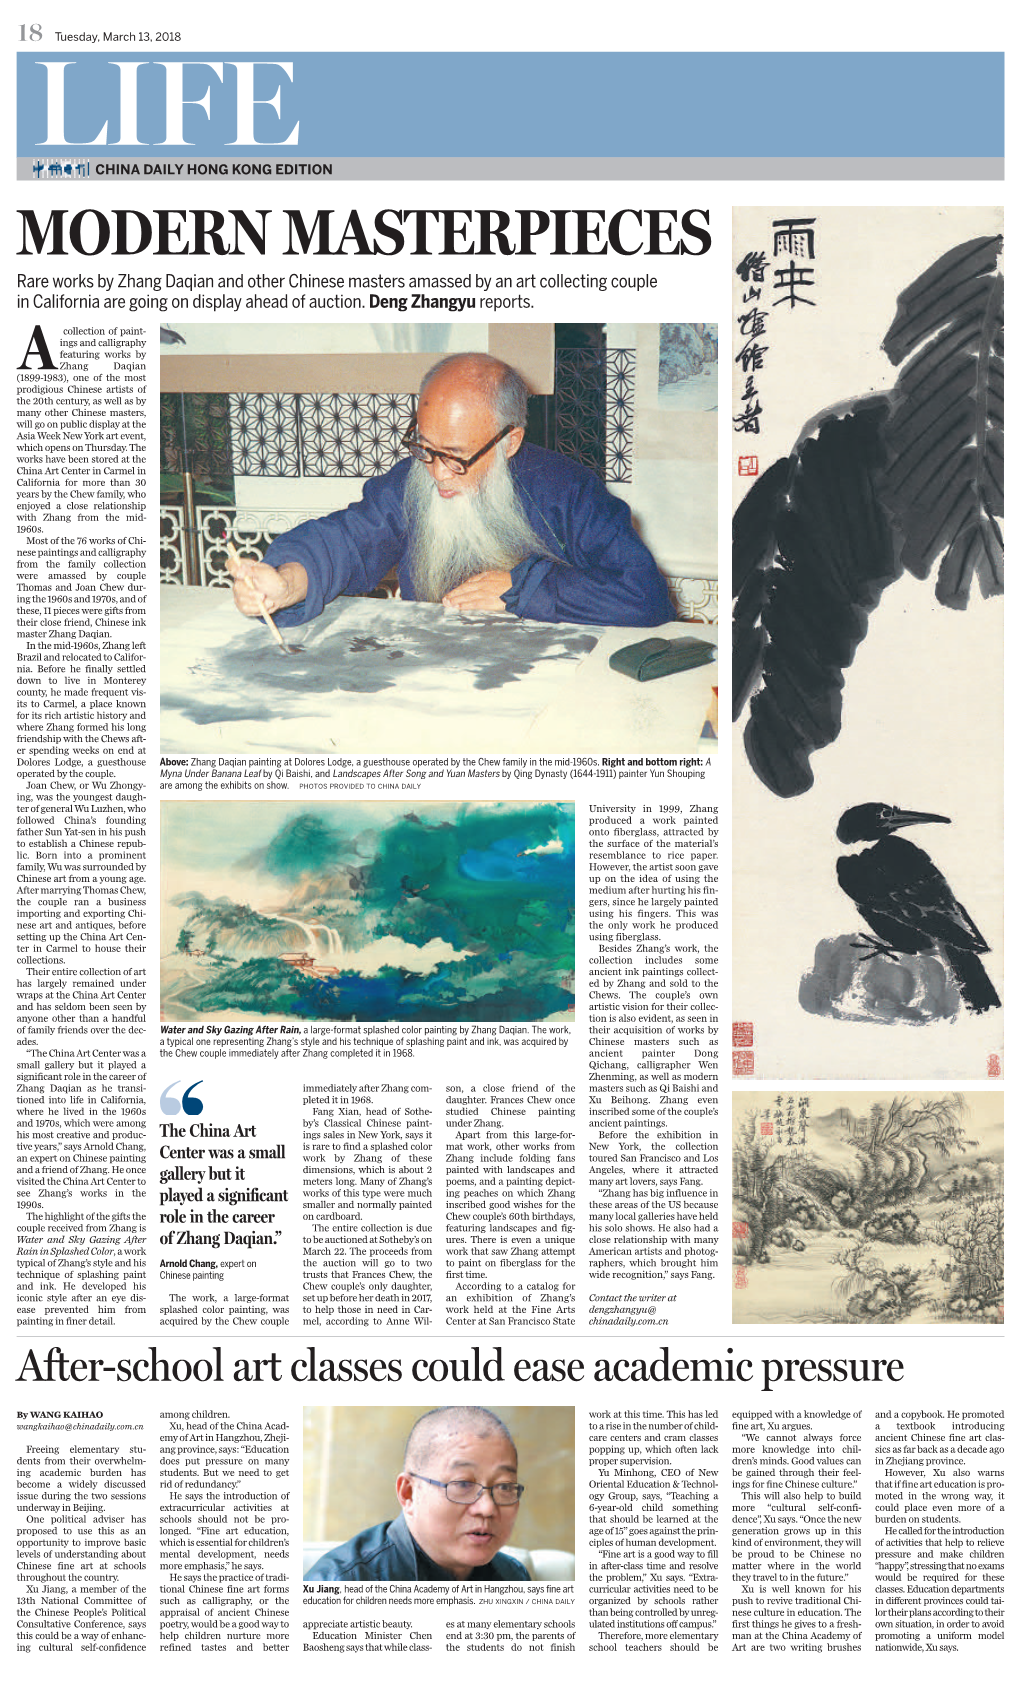 MODERN MASTERPIECES Rare Works by Zhang Daqian and Other Chinese Masters Amassed by an Art Collecting Couple in California Are Going on Display Ahead of Auction